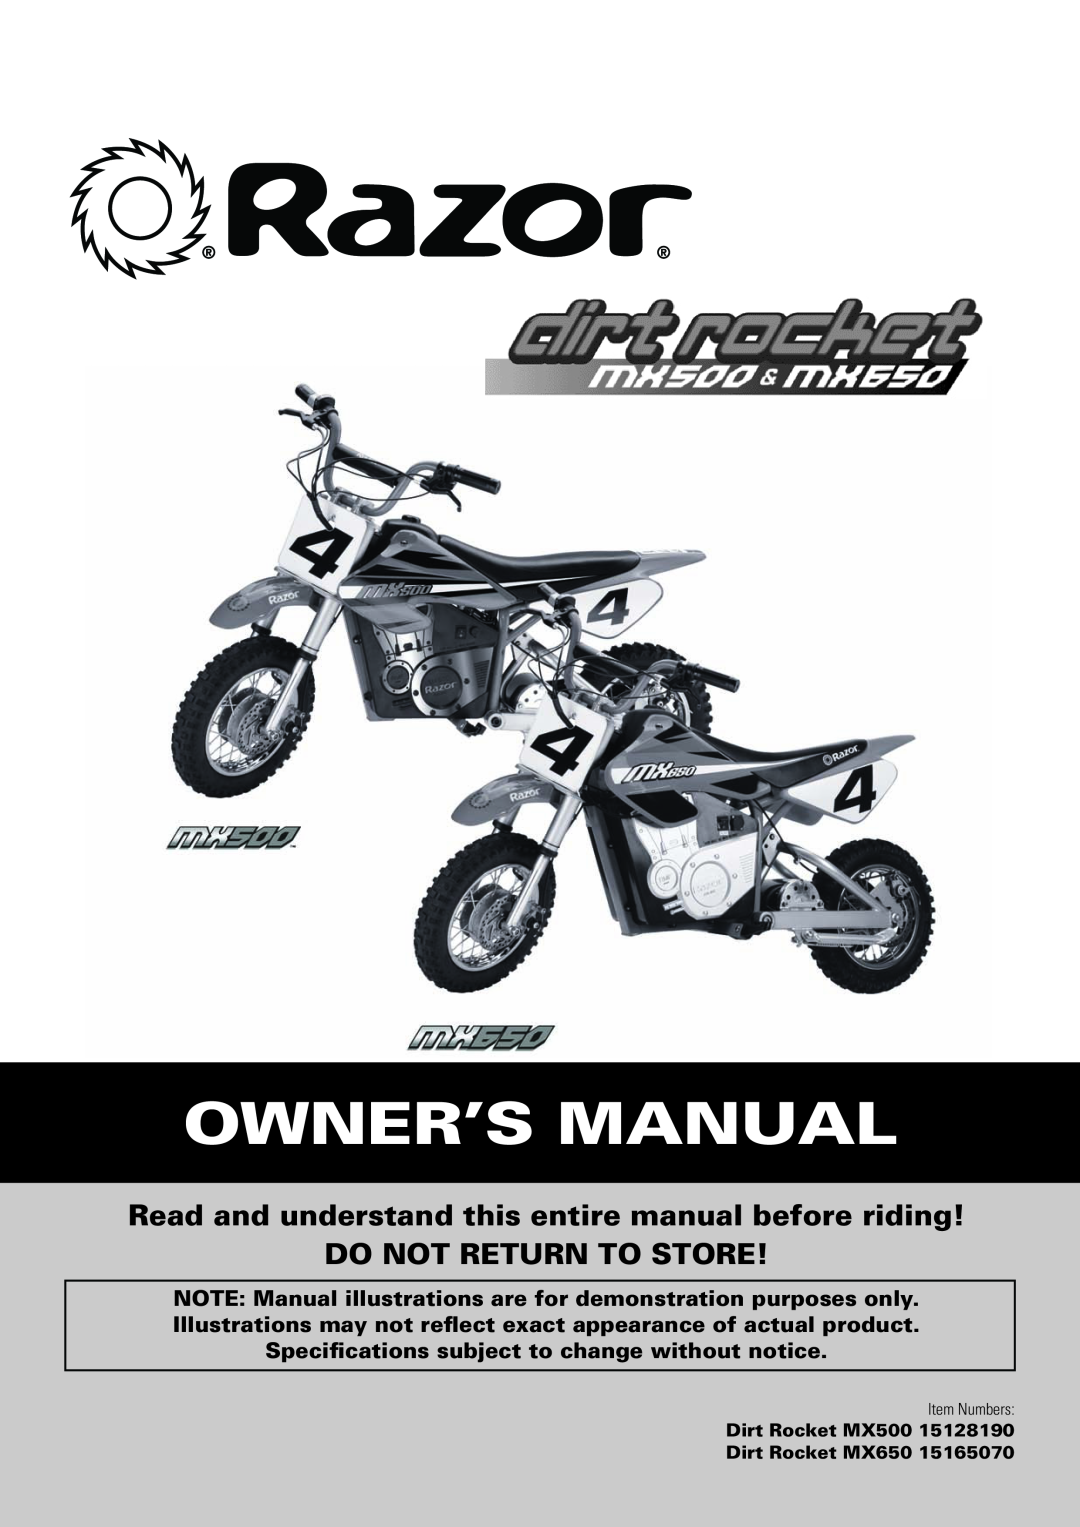 Razor owner manual Specifications subject to change without notice, Dirt rocket MX500 15128190 Dirt Rocket MX650 